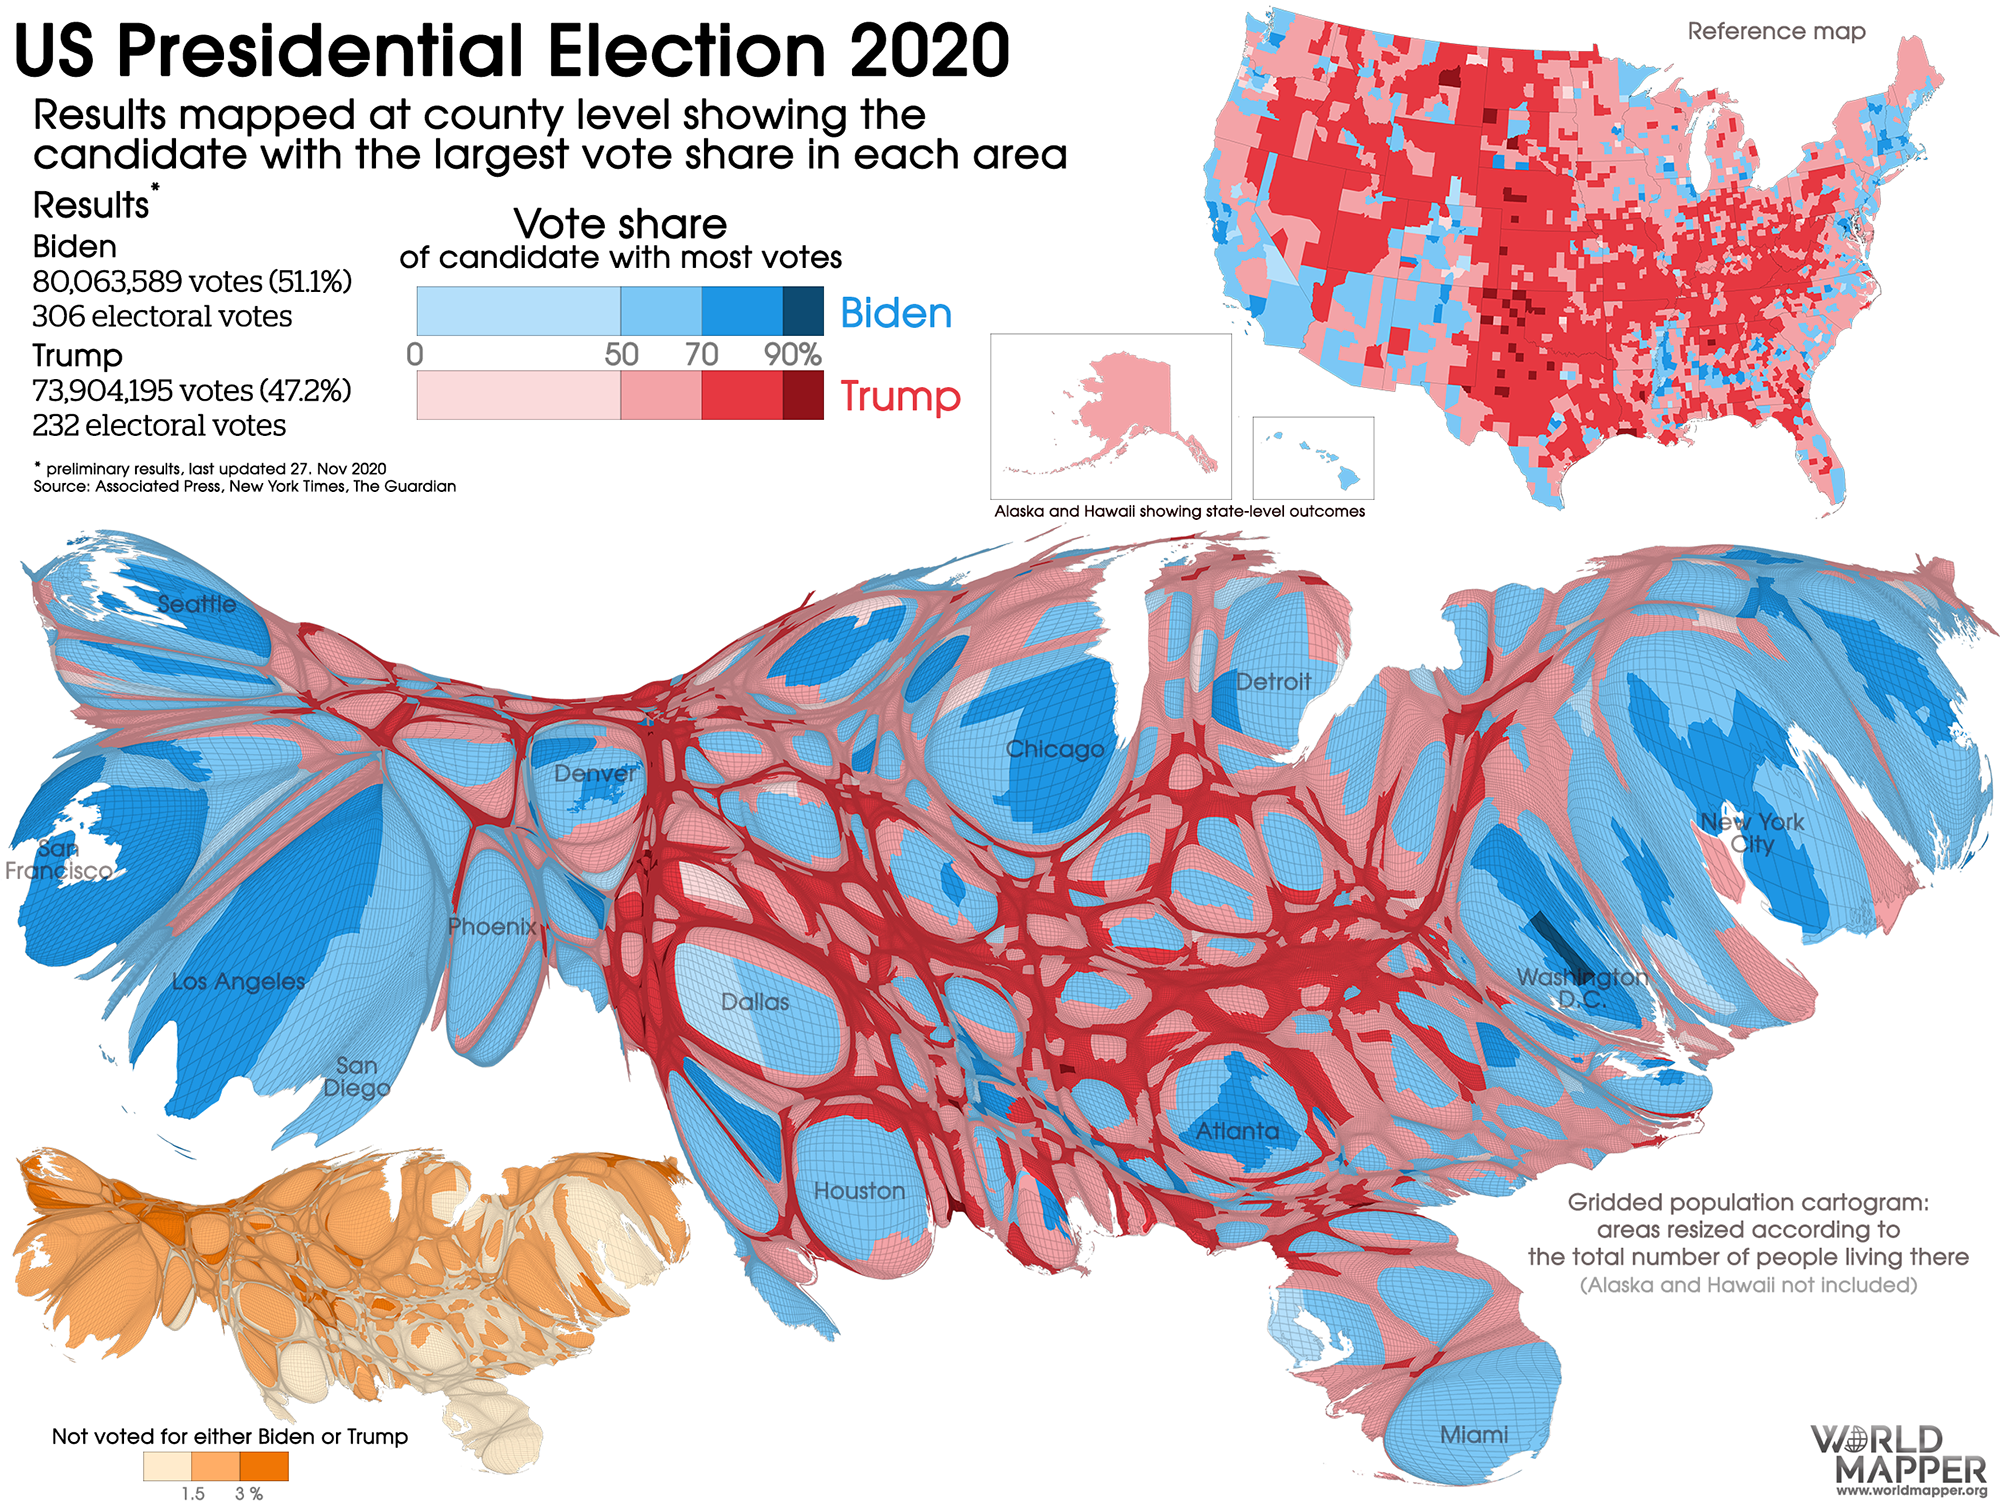 A cartogram of the US election results